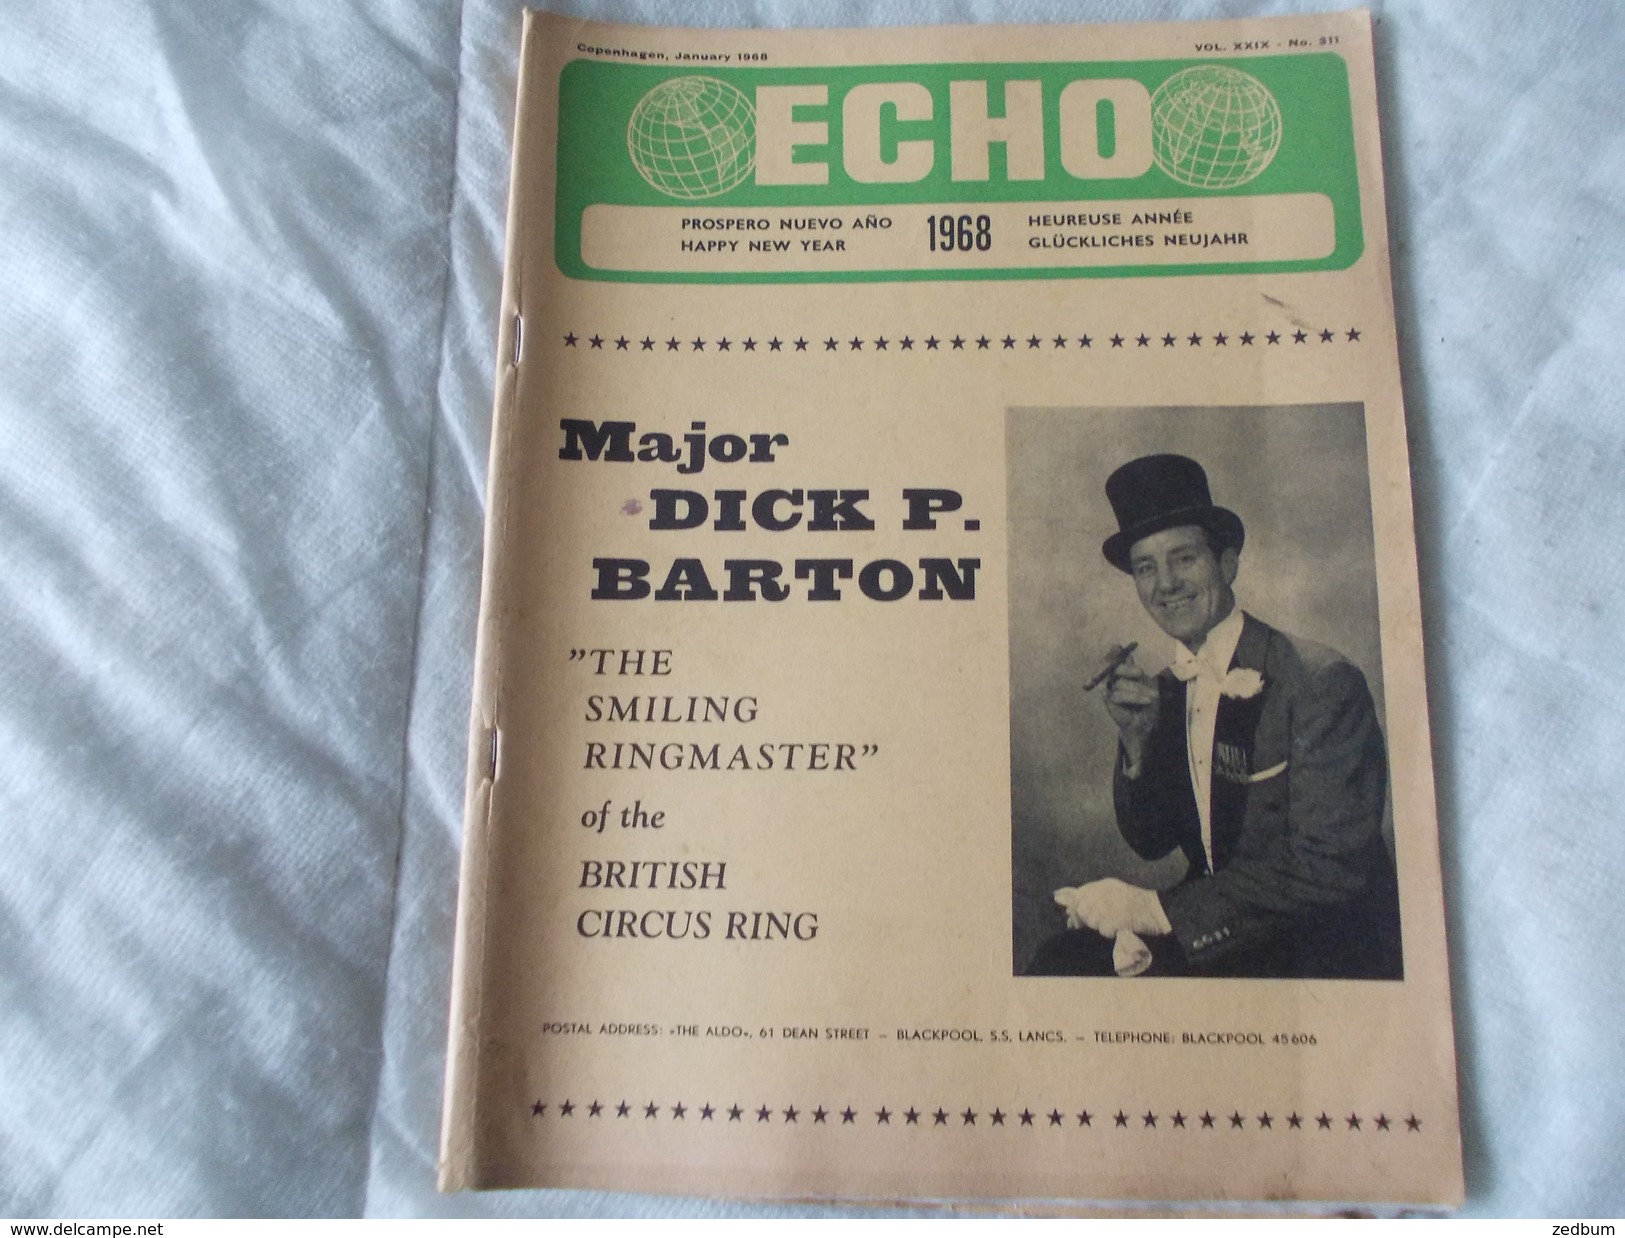 ECHO LTD Professional Circus And Variety Journal Independent International N° 311 January 1968 - Entertainment